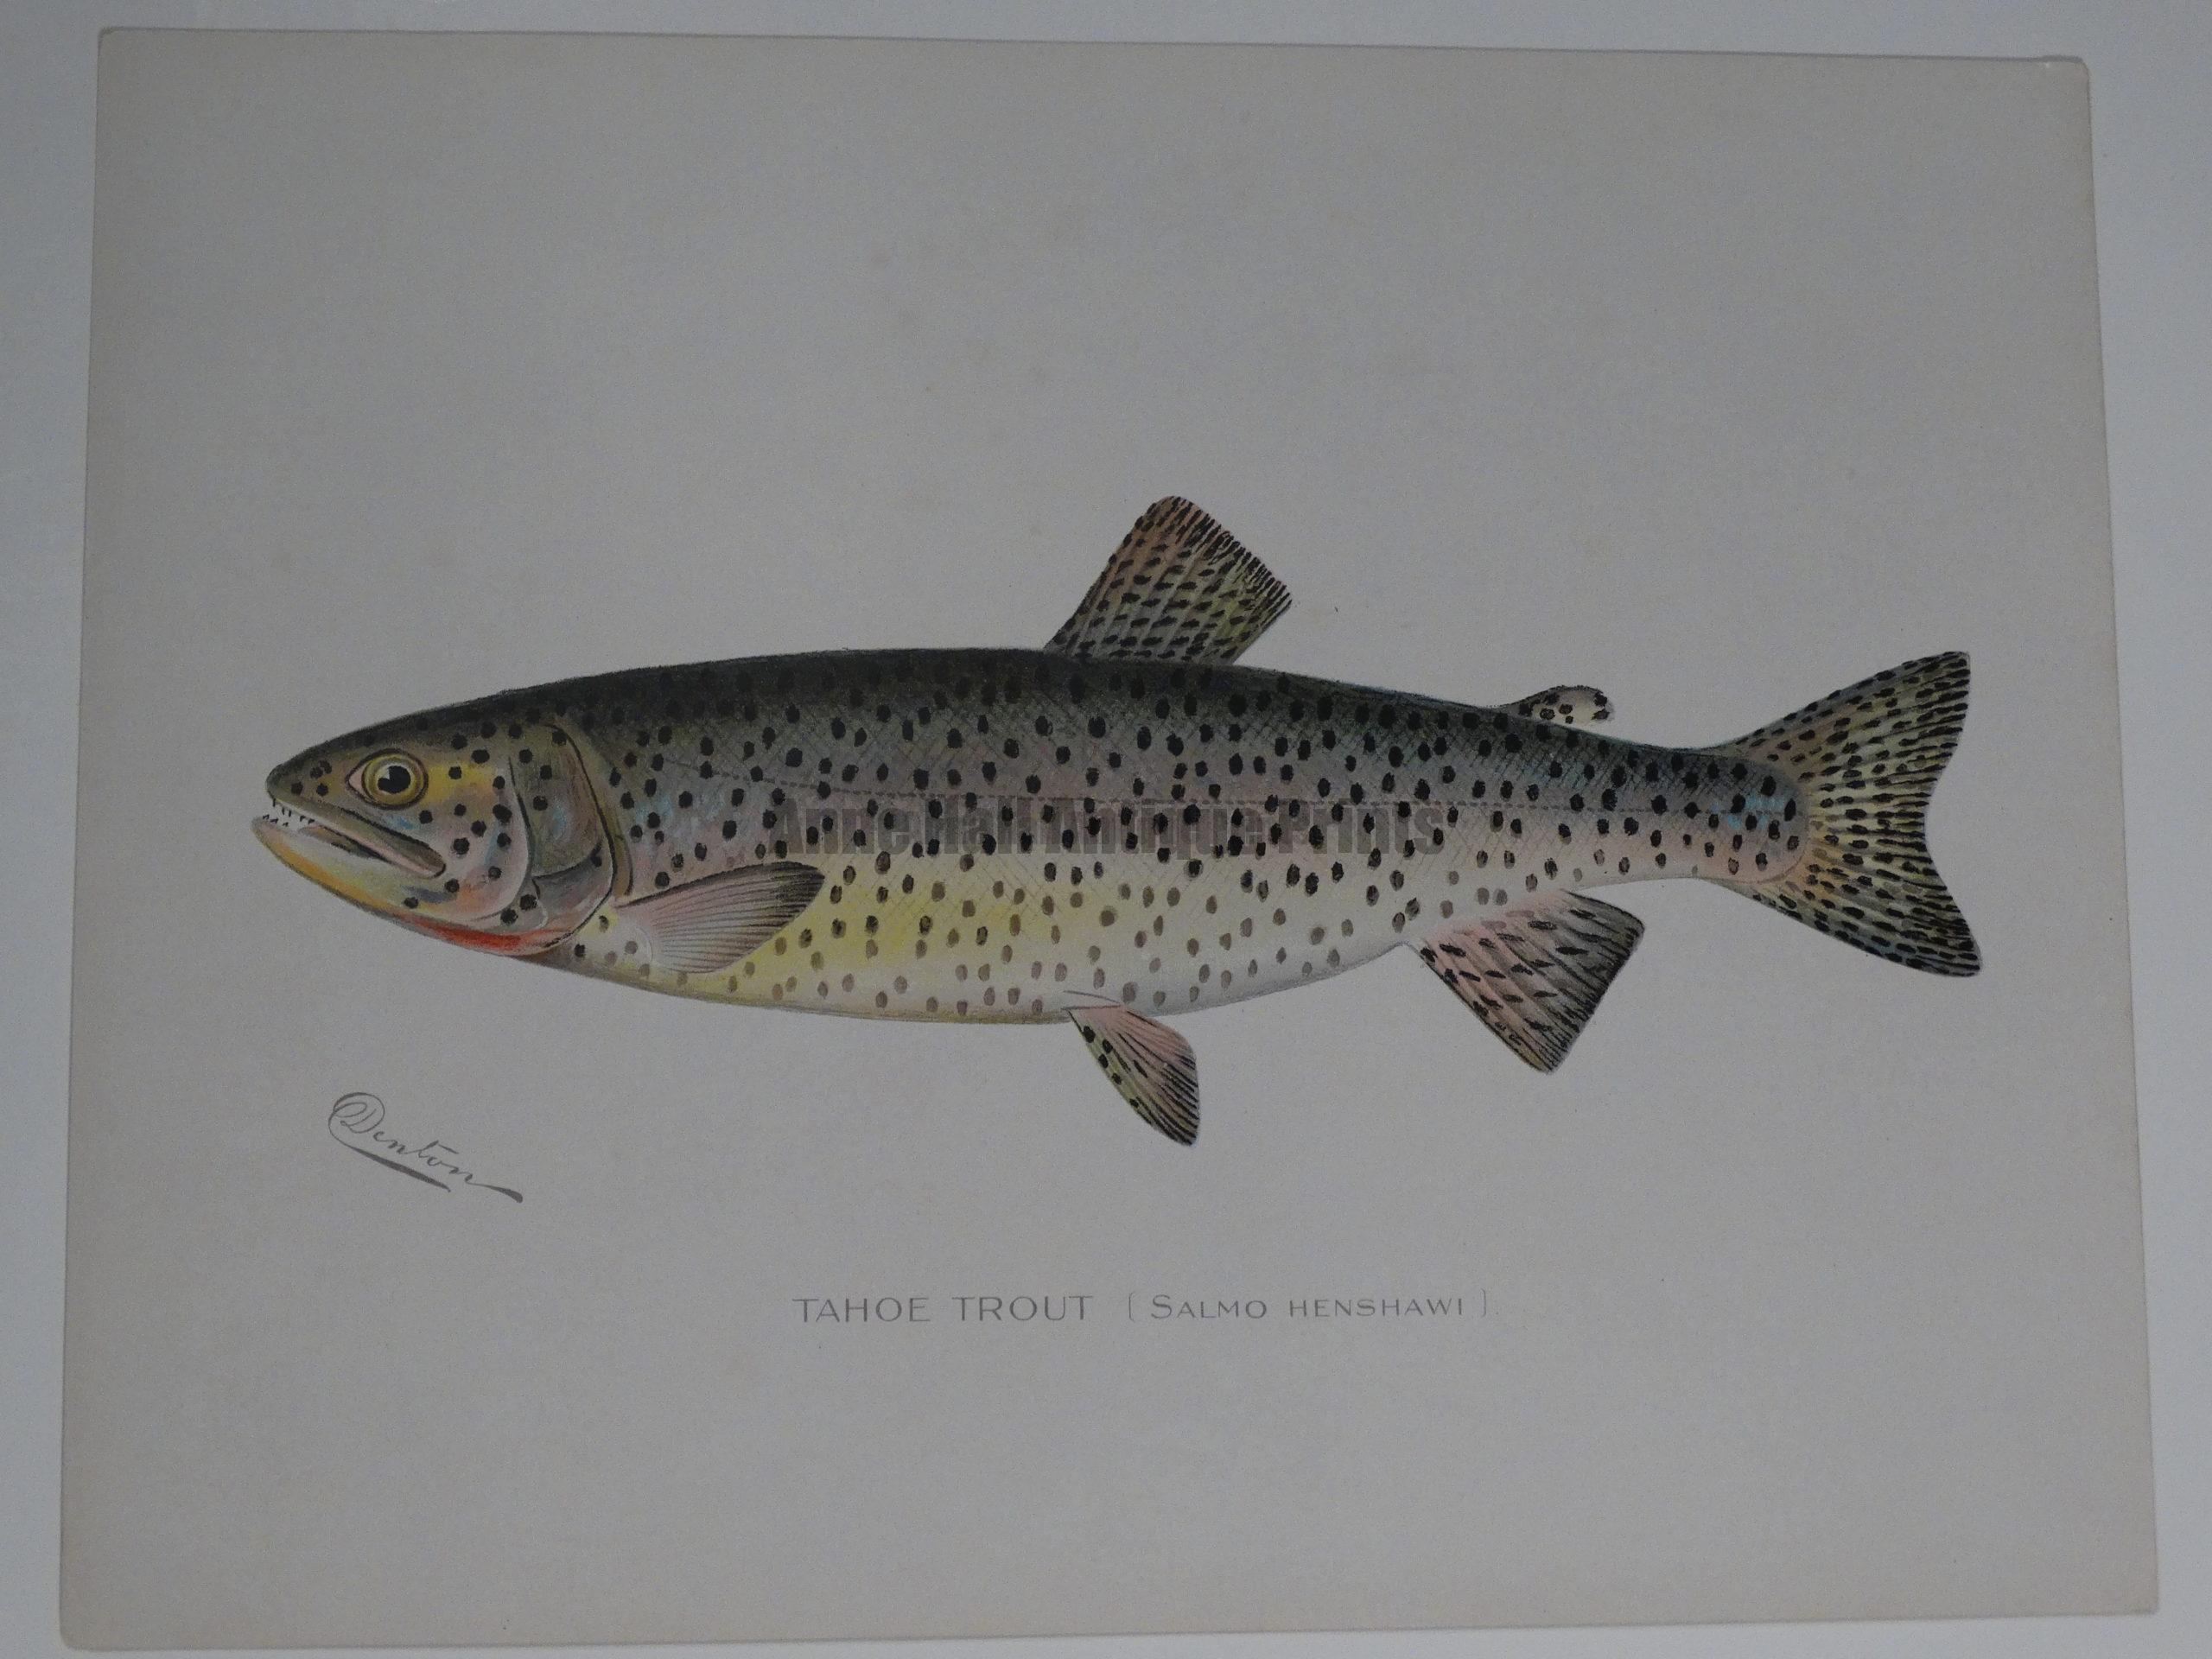 Denton Tahoe Trout Salmon.  $75.  An outstanding portfolio color lithograph published for Sherman Denton as documentation of trout-salmon found in North America.